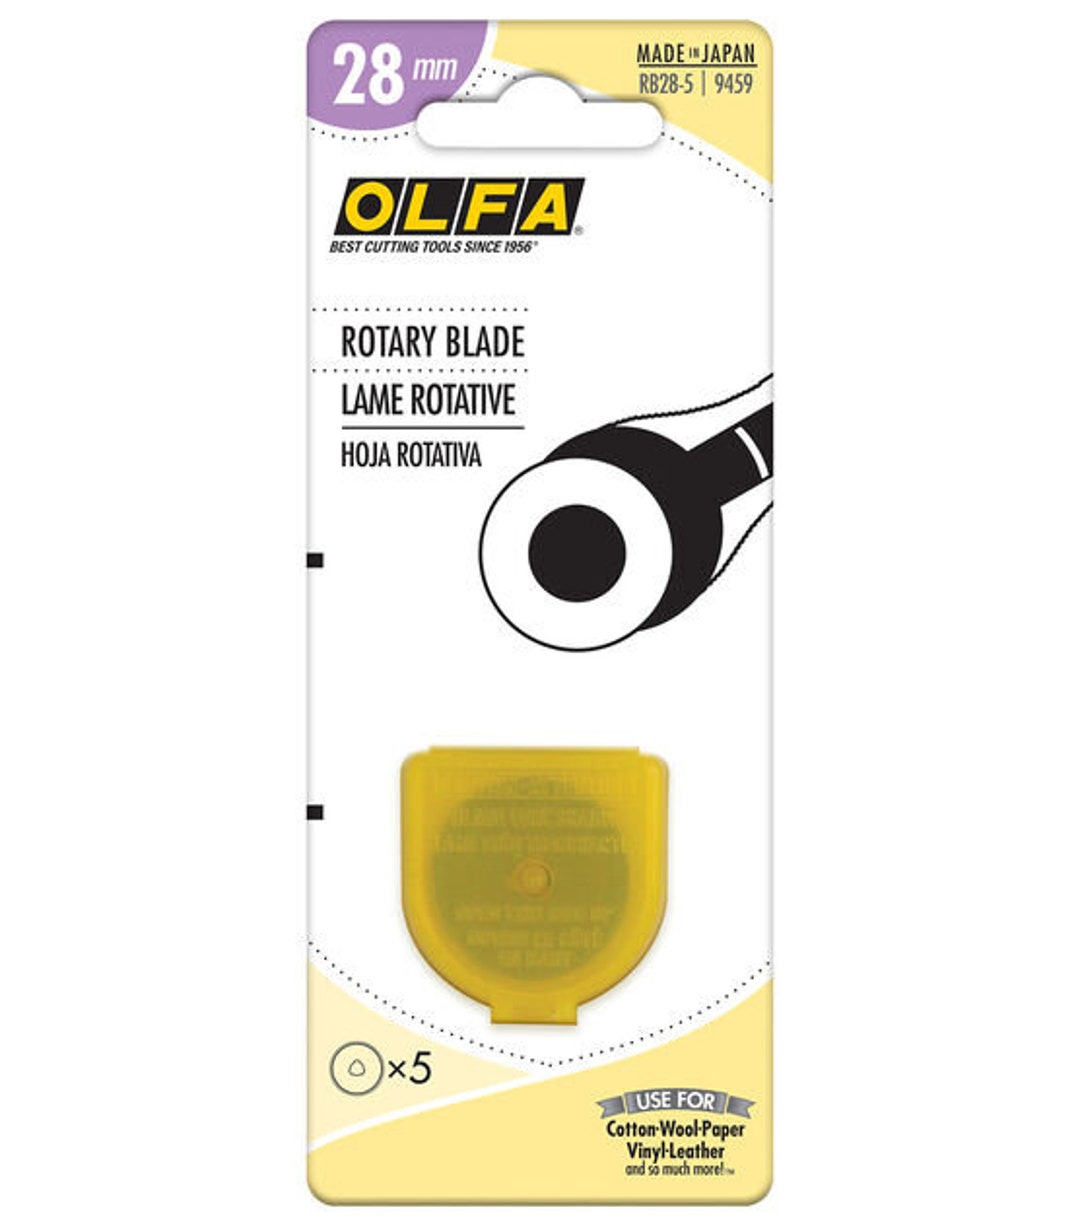 OLFA ROTARY BLADE 28 Mm 5 Ct Replacement Blades for Rotary Cutter -   Singapore